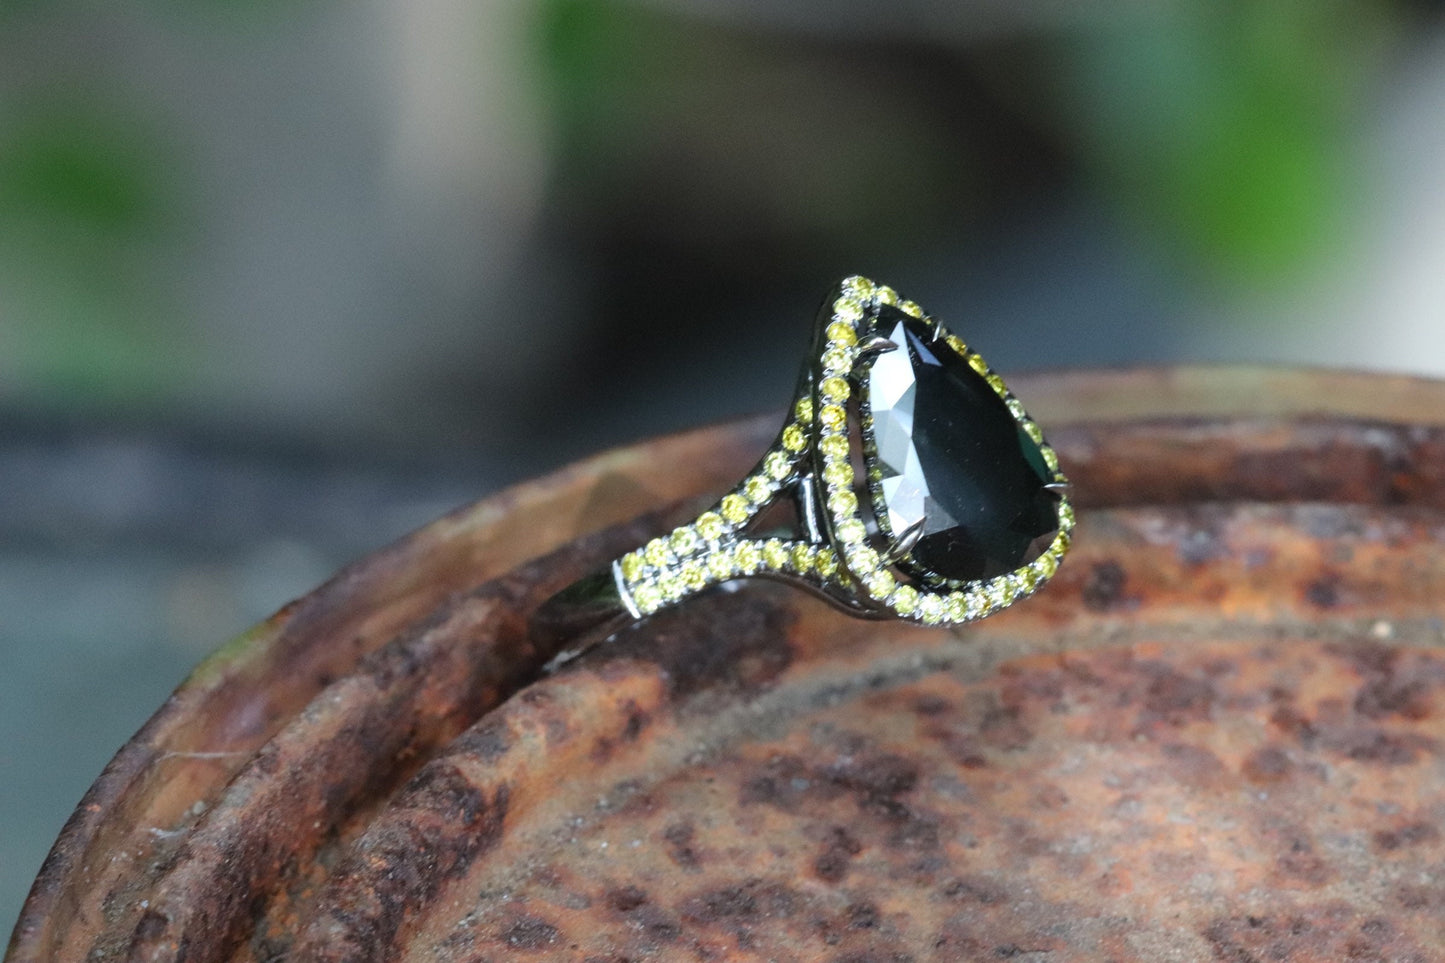 Black and yellow diamond pear-shaped engagement ring in 14 karat black gold size 6.5